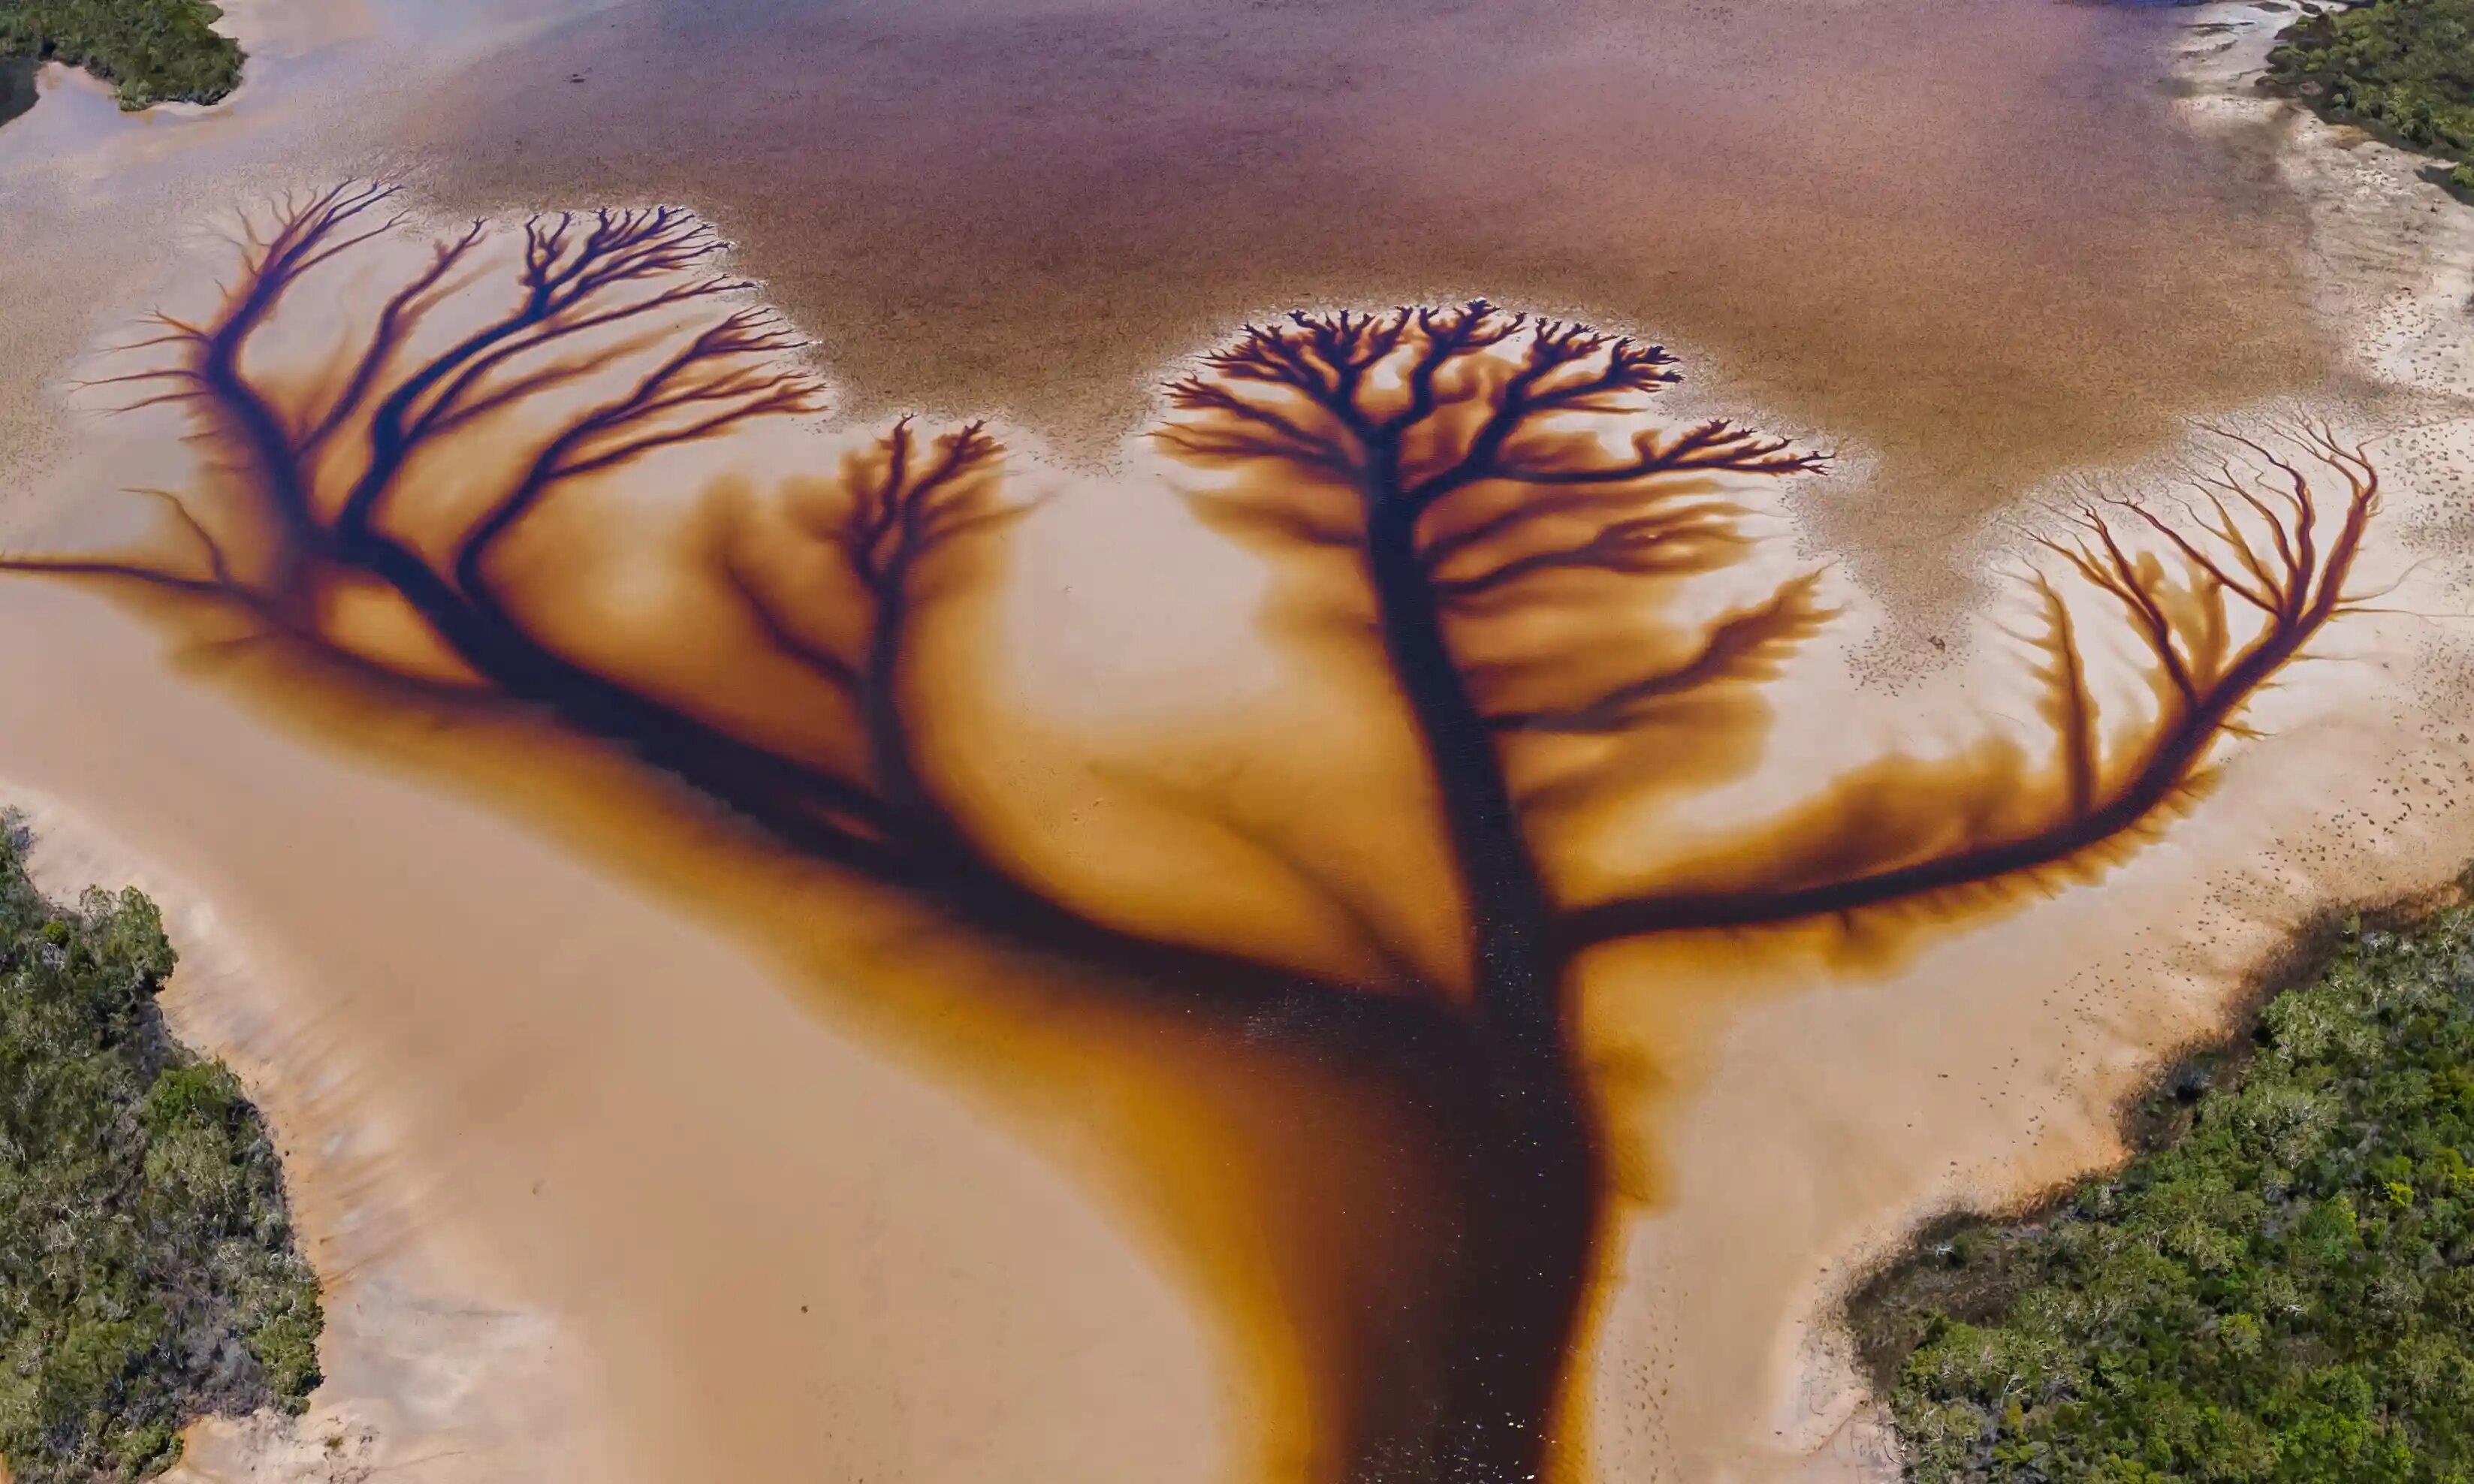 “The water is soaked by tea tree oils, hence the brown colour, and the extra water flowing out of the lake has created this stunning natural masterpiece,